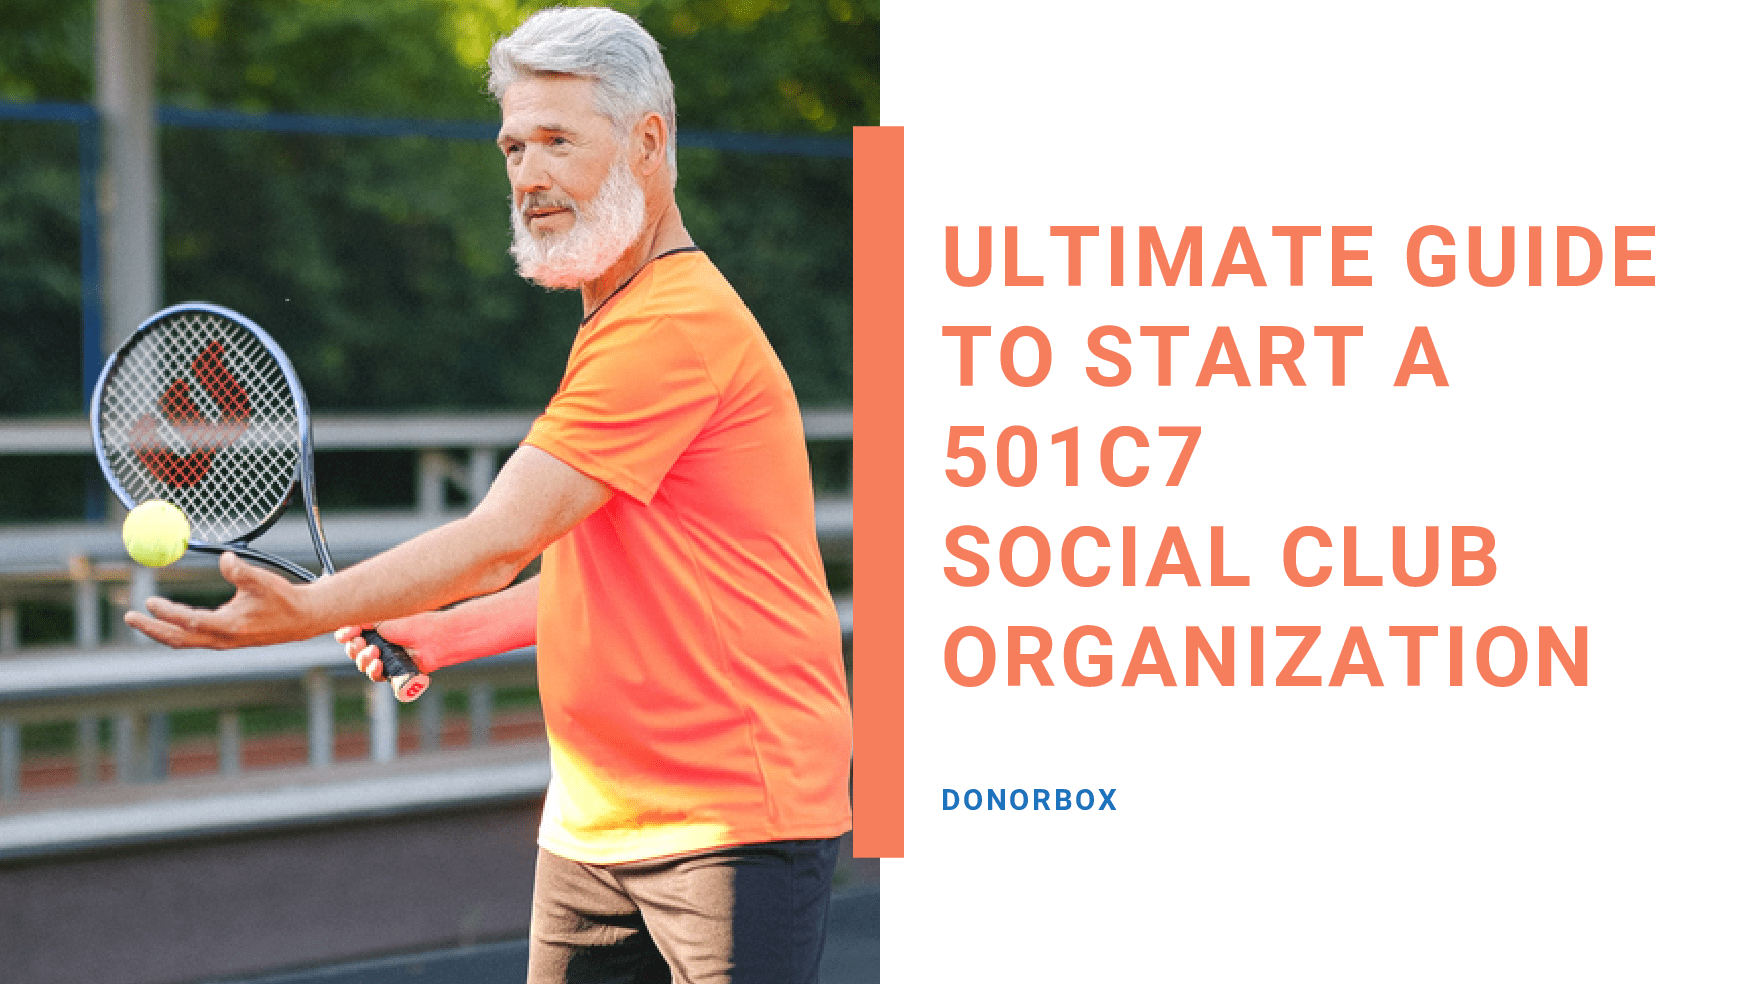 Ultimate Guide to Start a 501c7 Social Club Organization